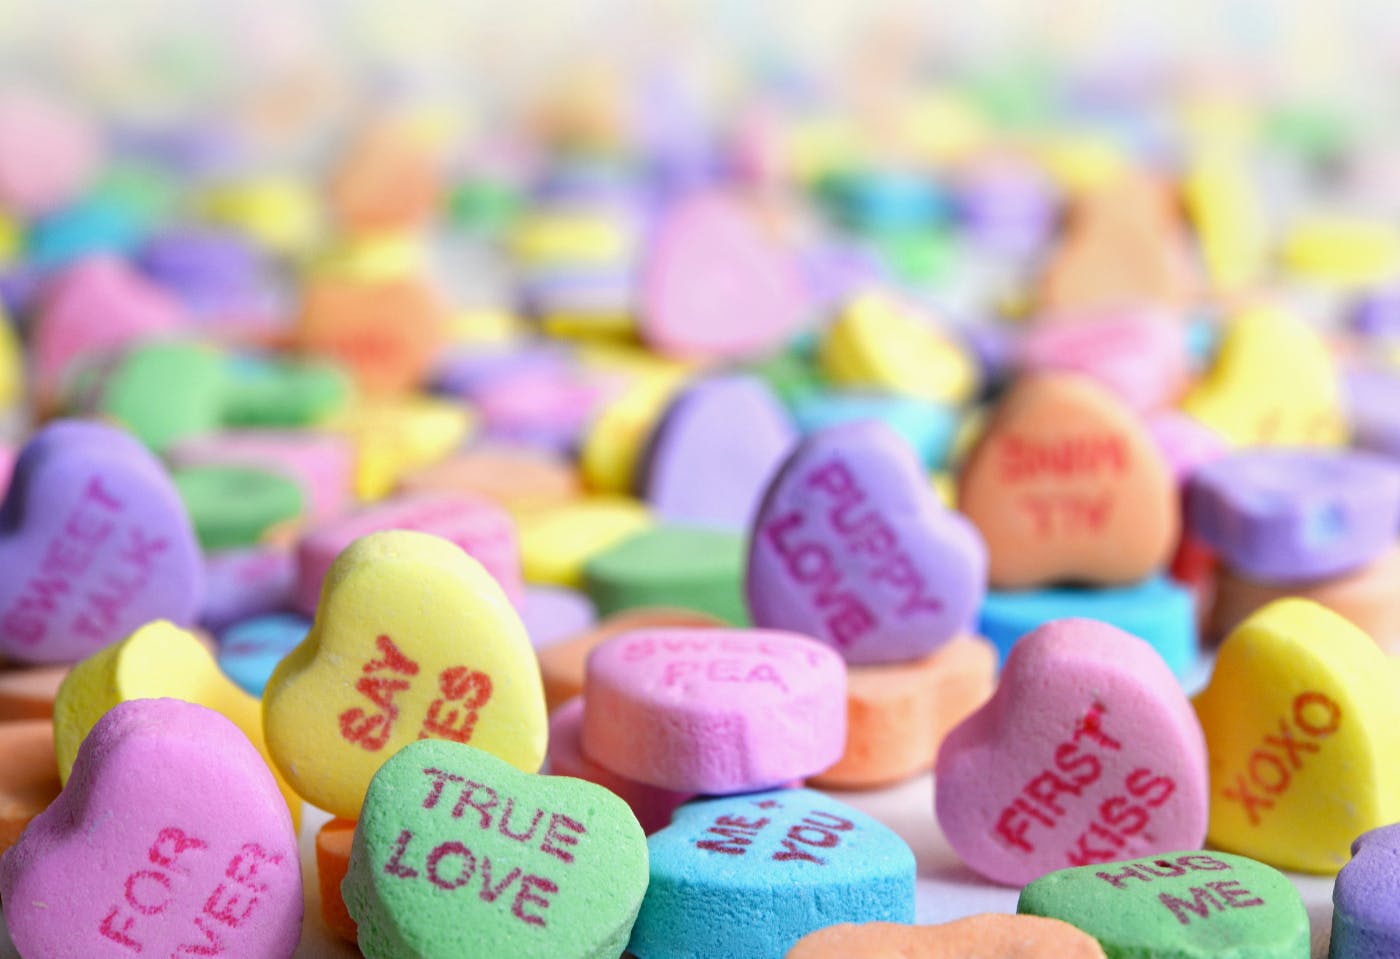 An endless pile of tiny colored hearts with messages on them